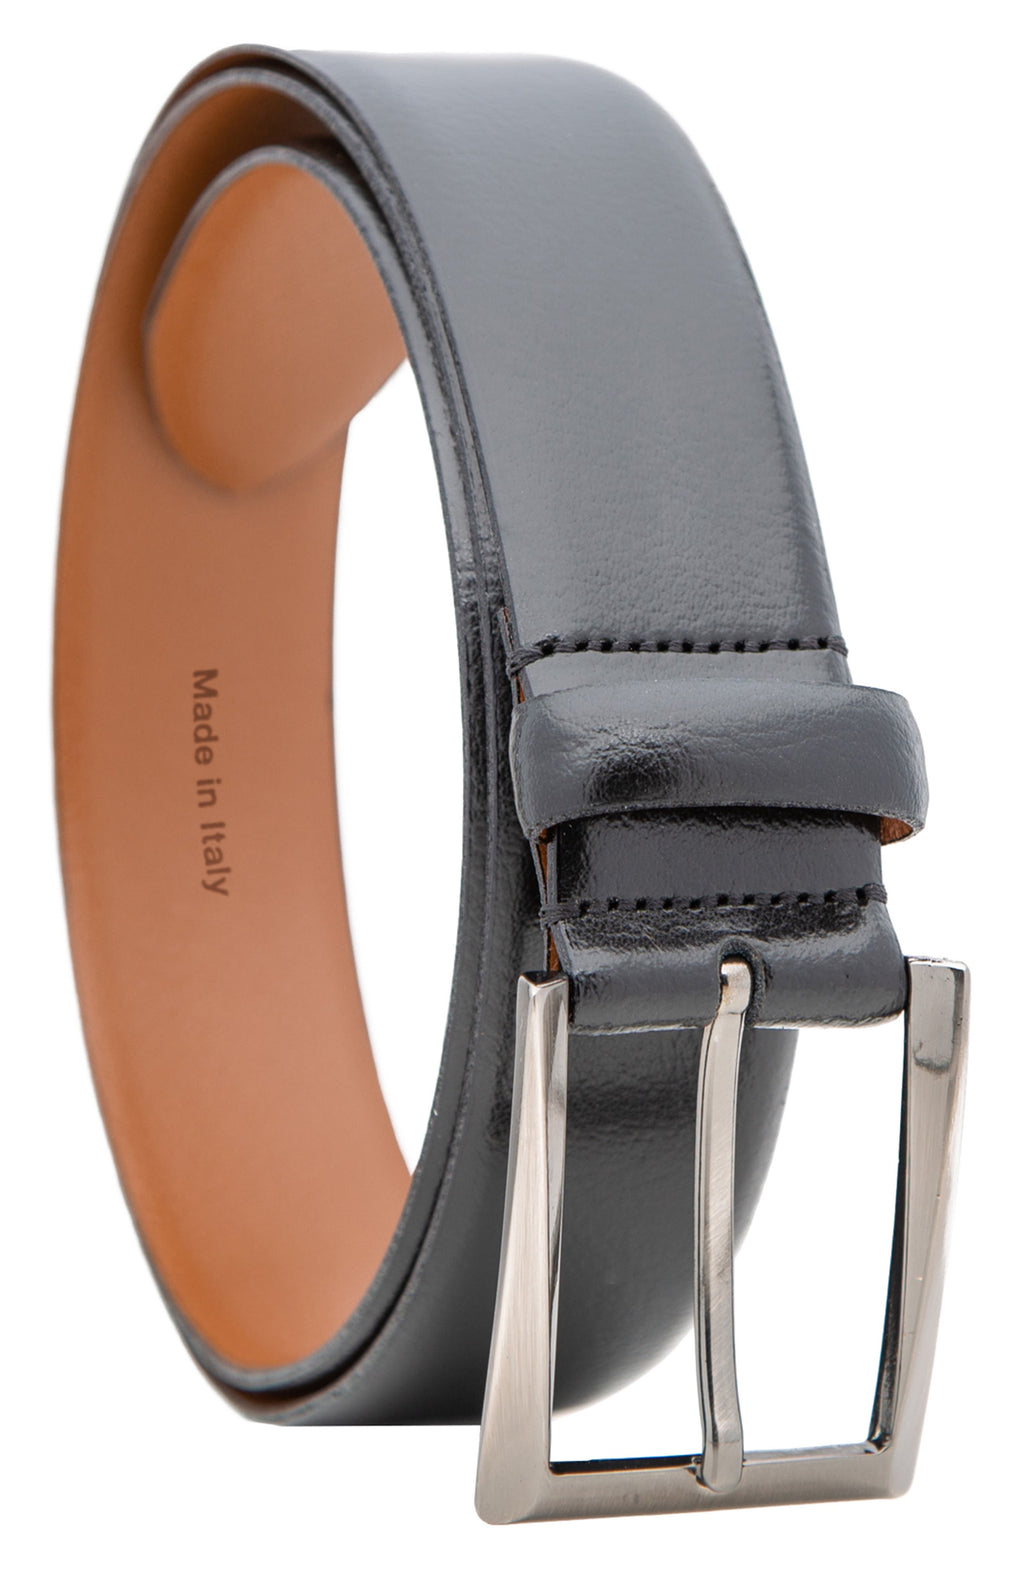 MADE IN ITALY Soft Pebble Grain Leather Belt, Main, color, BLACK